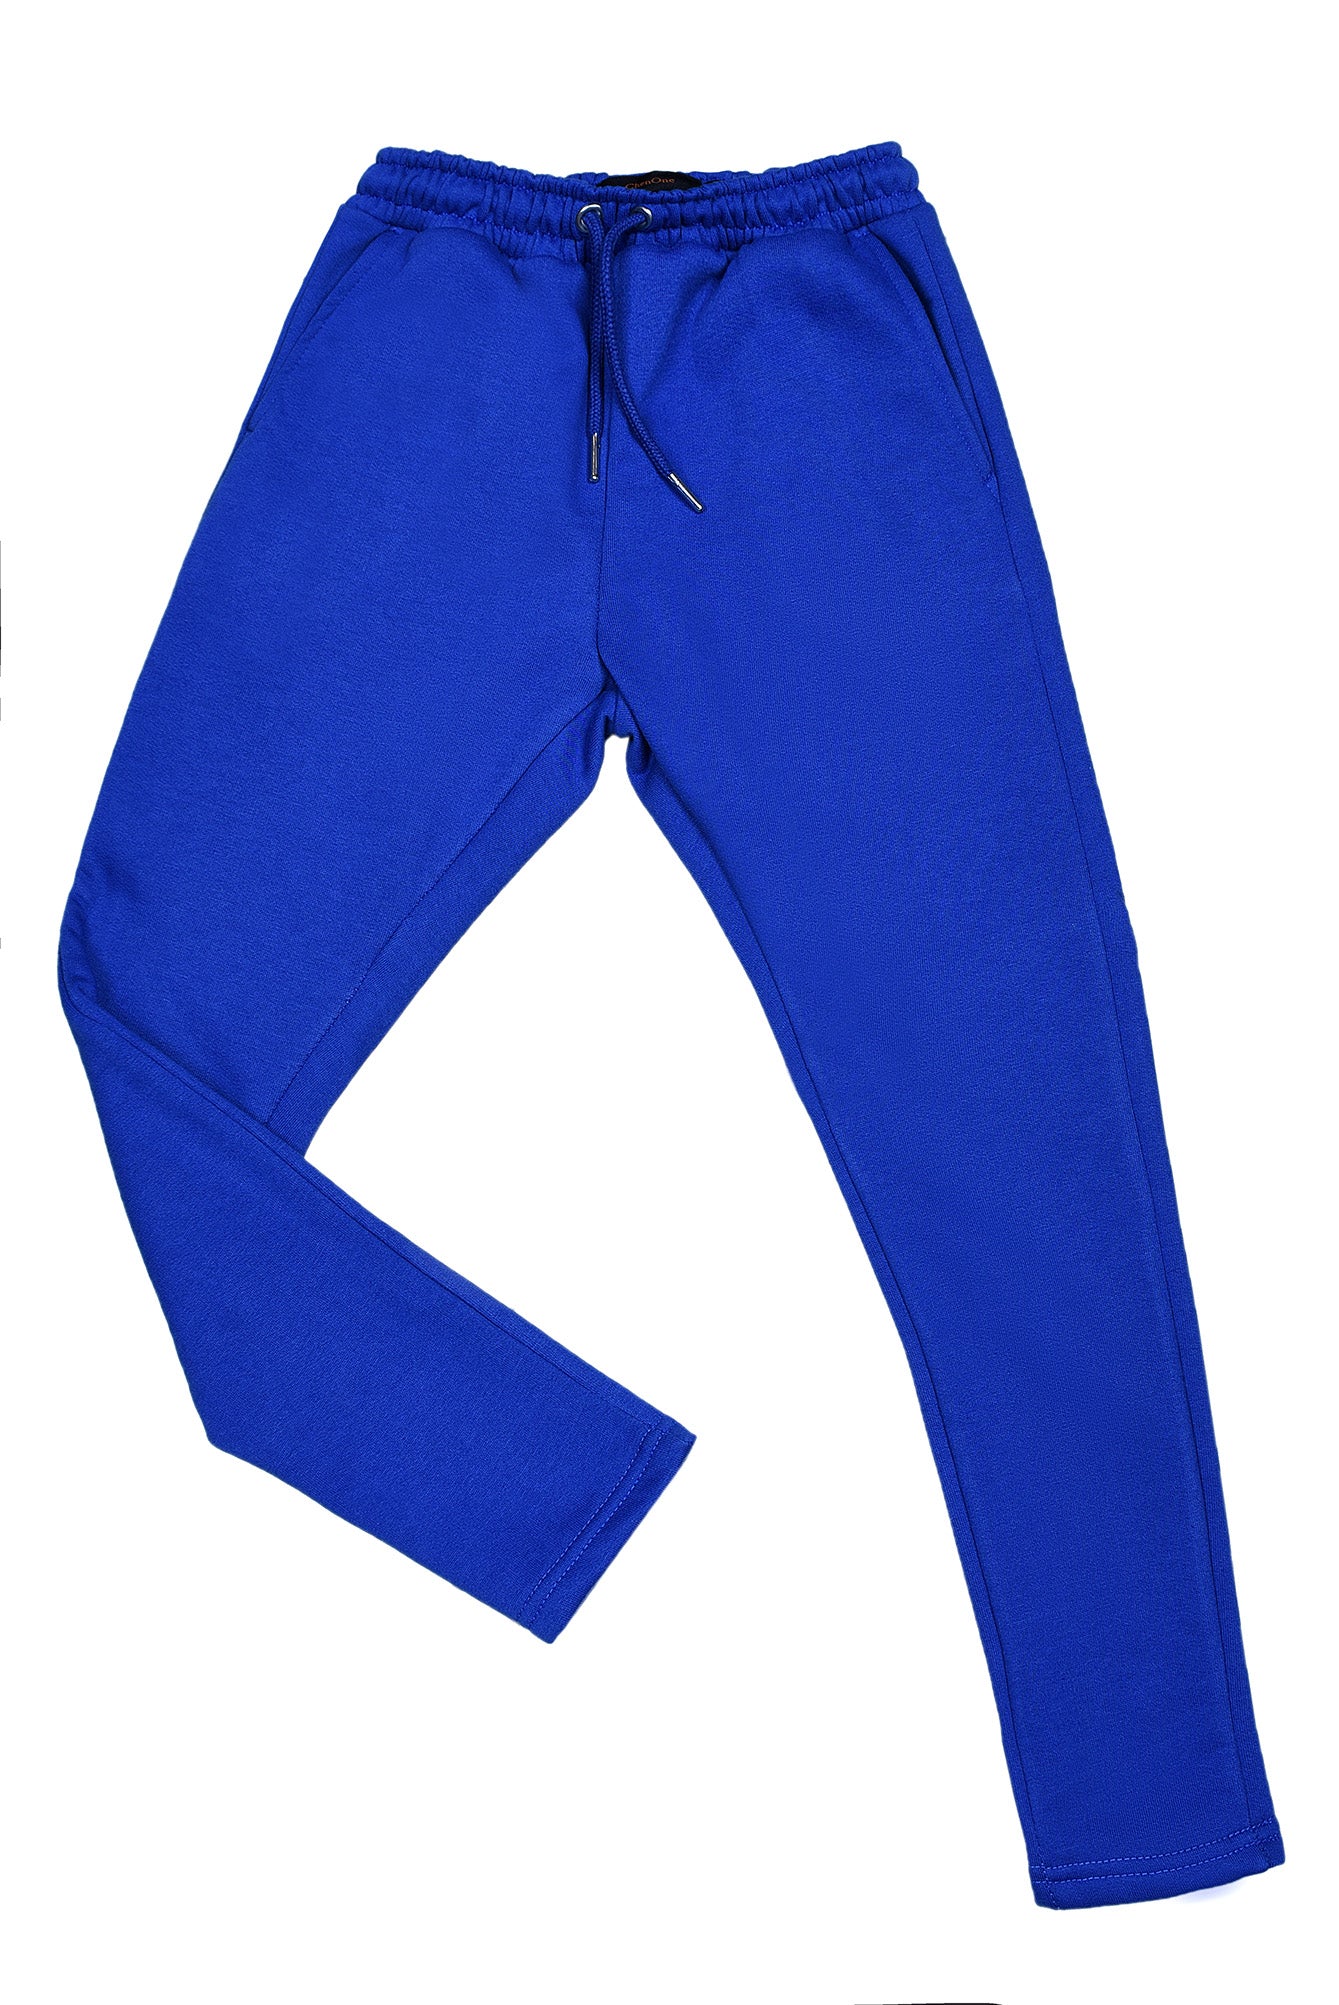 KDS-BC-13147 PULL ON TROUSER BLUE